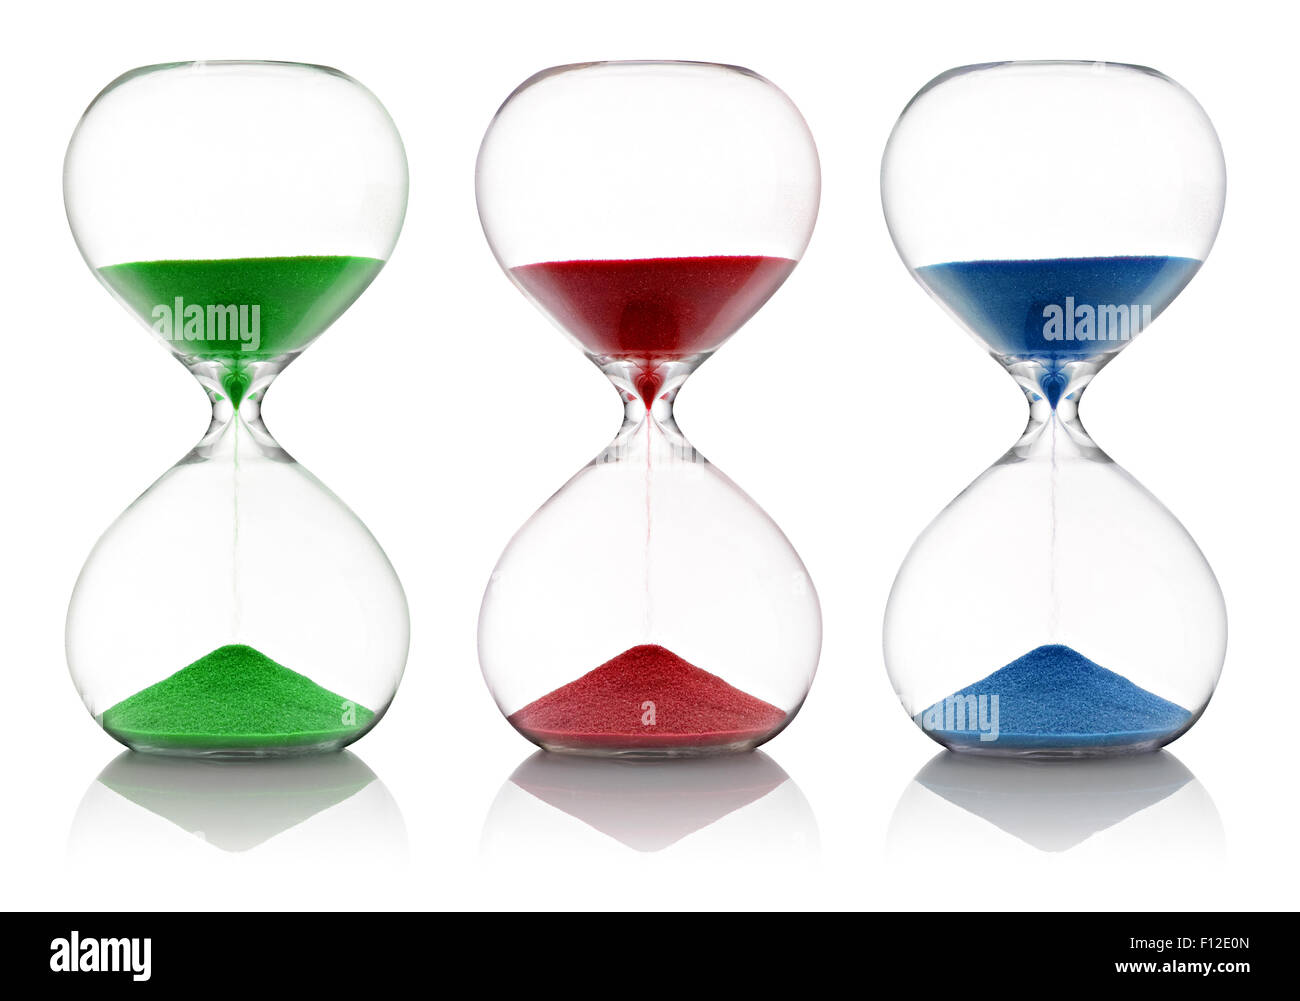 Colored sand, red, green and blue, running through glass hourglasses Stock Photo